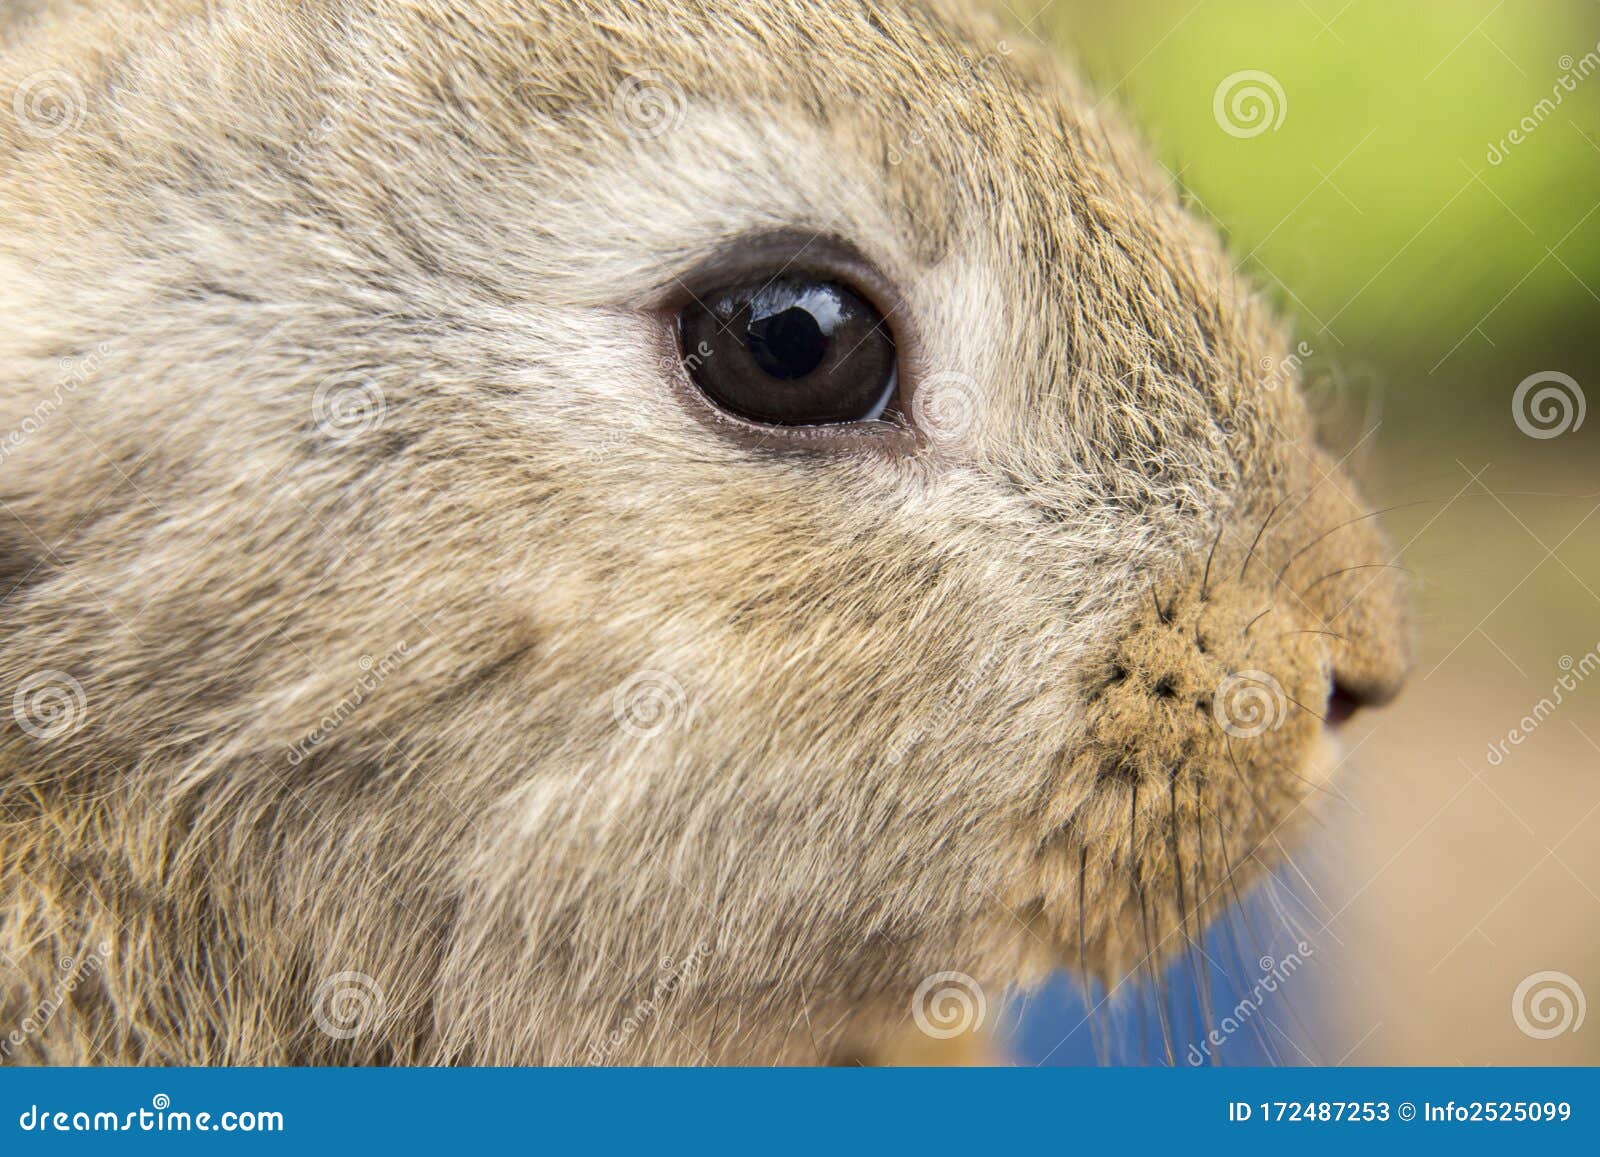 close up of baby rabbit eye in a farm background